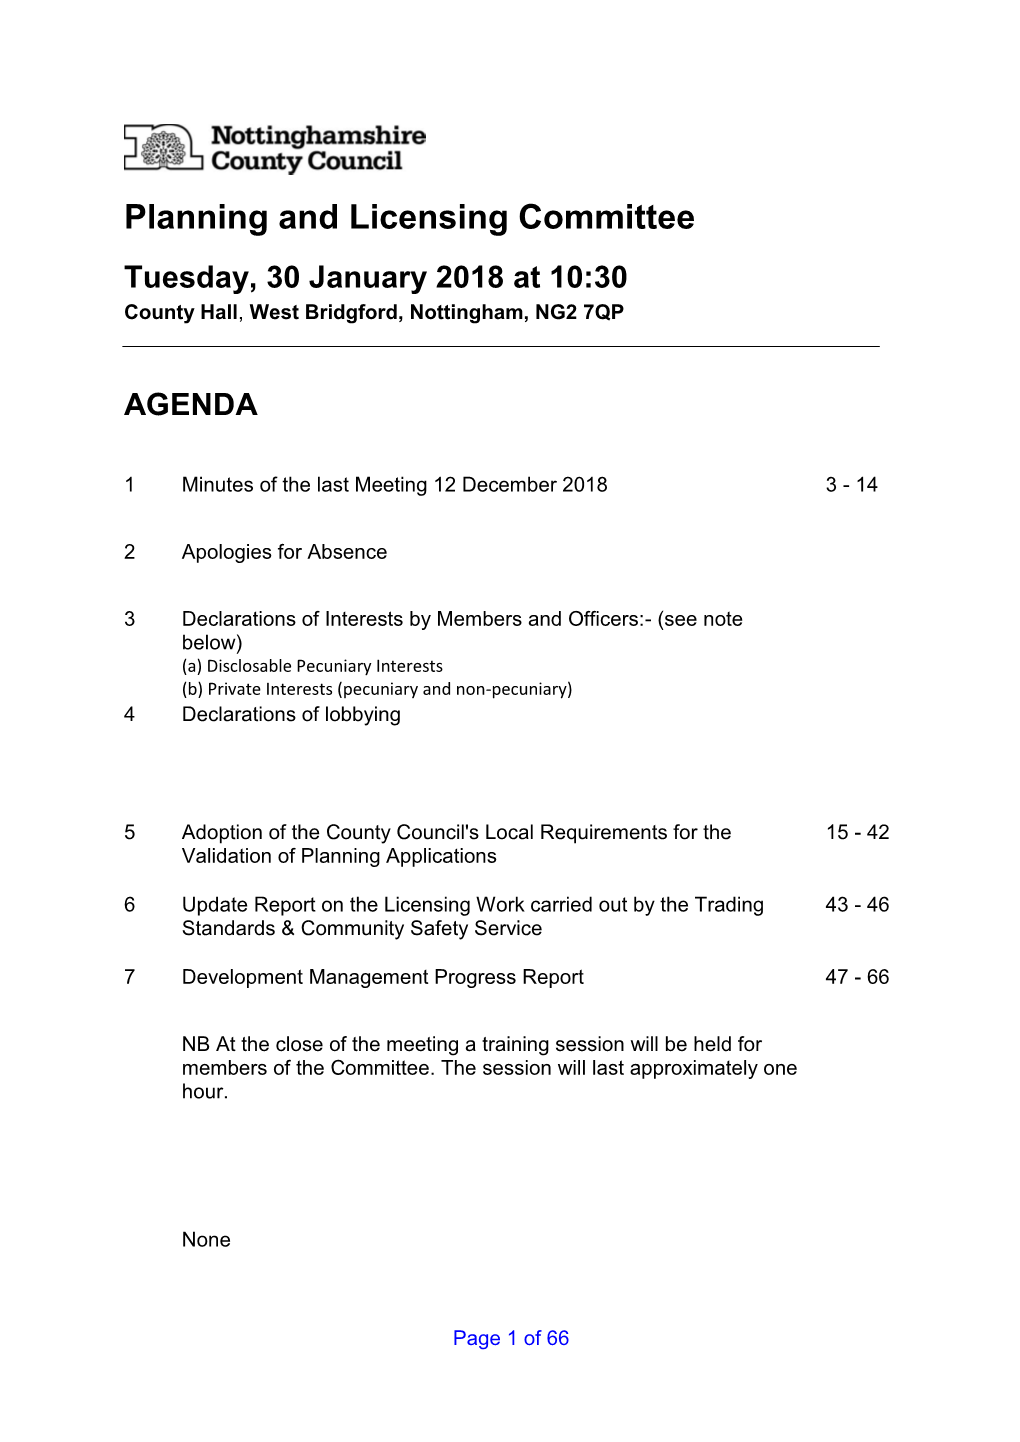 Planning and Licensing Committee Tuesday, 30 January 2018 at 10:30 County Hall, West Bridgford, Nottingham, NG2 7QP